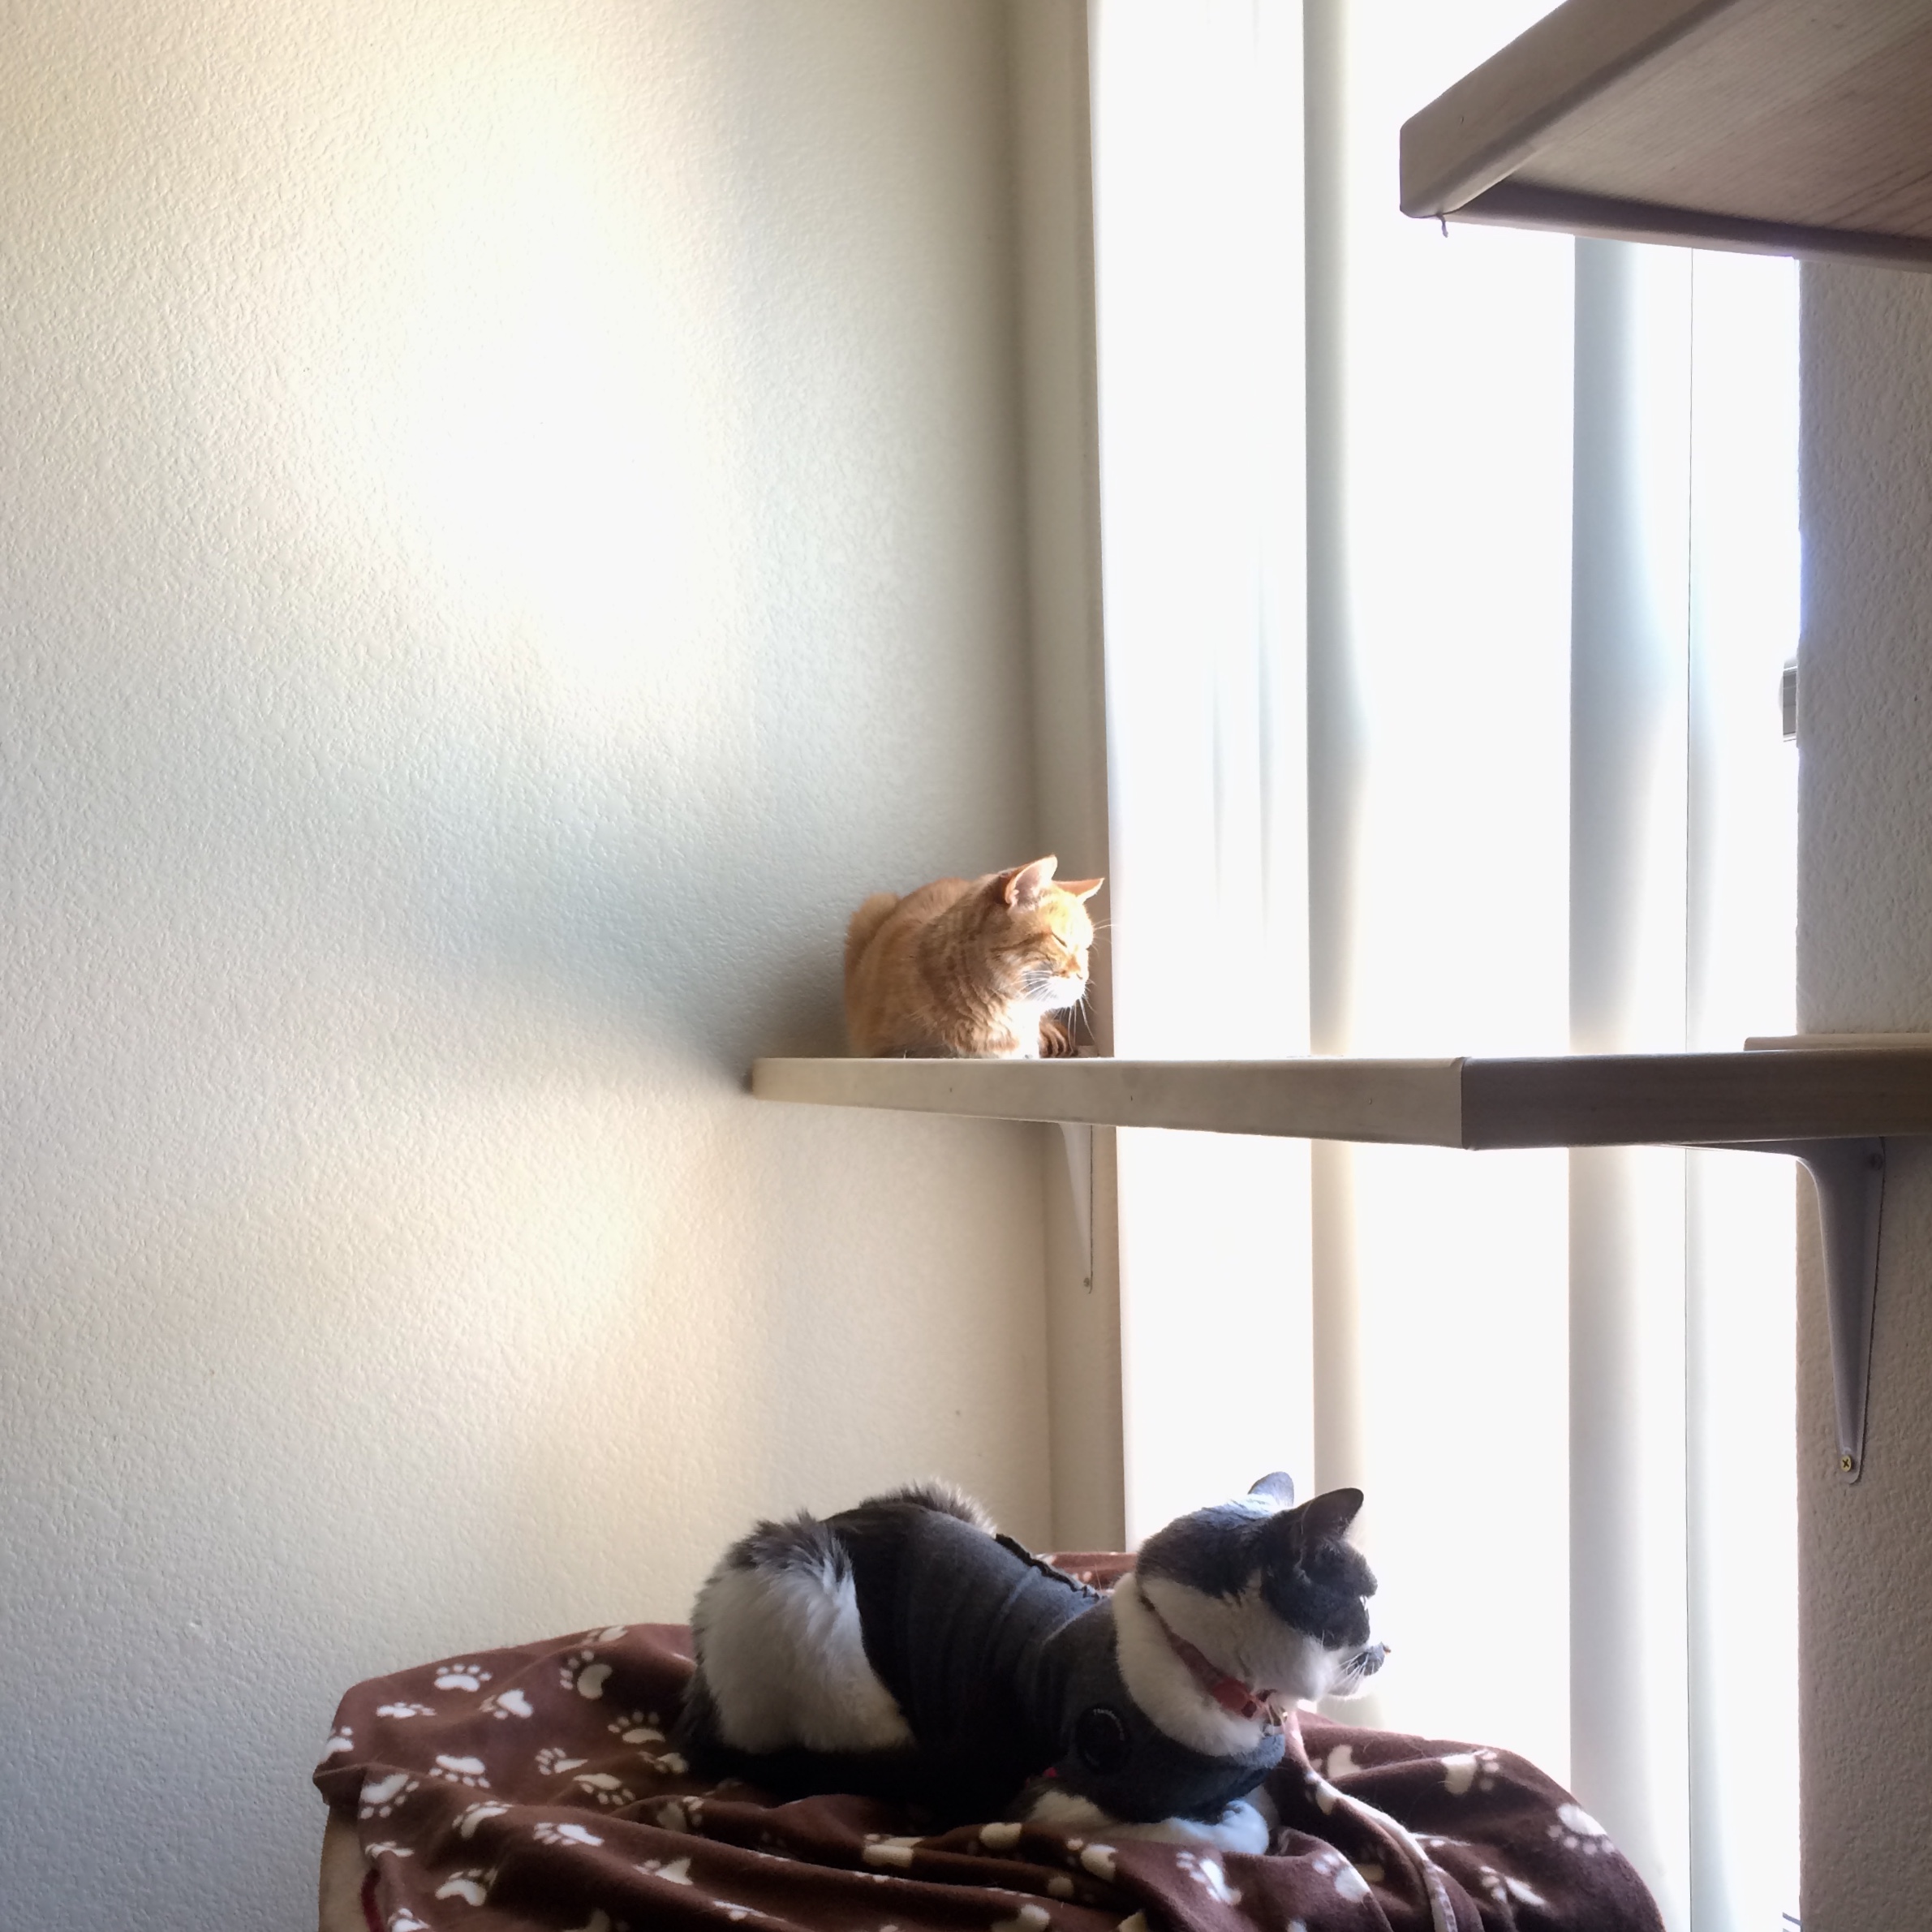 An orange tabby lounging on a cat shelf. A gray and white cat wearing a Thundershirt is lounging beneath the shelf on some blankets.